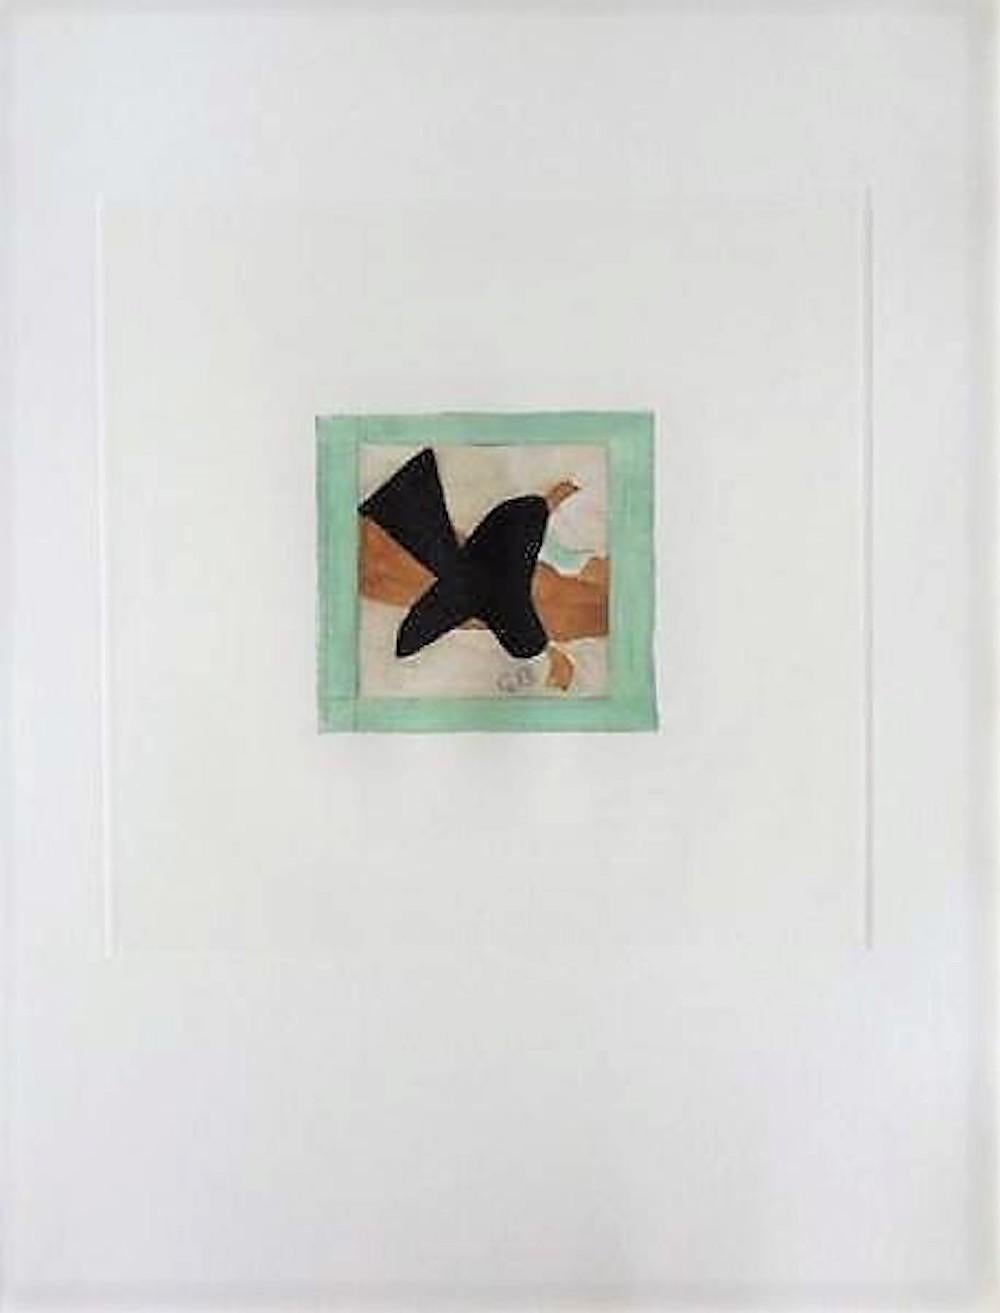 Created as an aquatint in 1965 and printed by Ateliers Crommelynck, Oisea en Vol (Bird in Flight) is an aquatint created by Georges Braque measuring 15 x 11 in. (38 x 28 cm), unframed.  The print is signed in the lithographic plate (printed